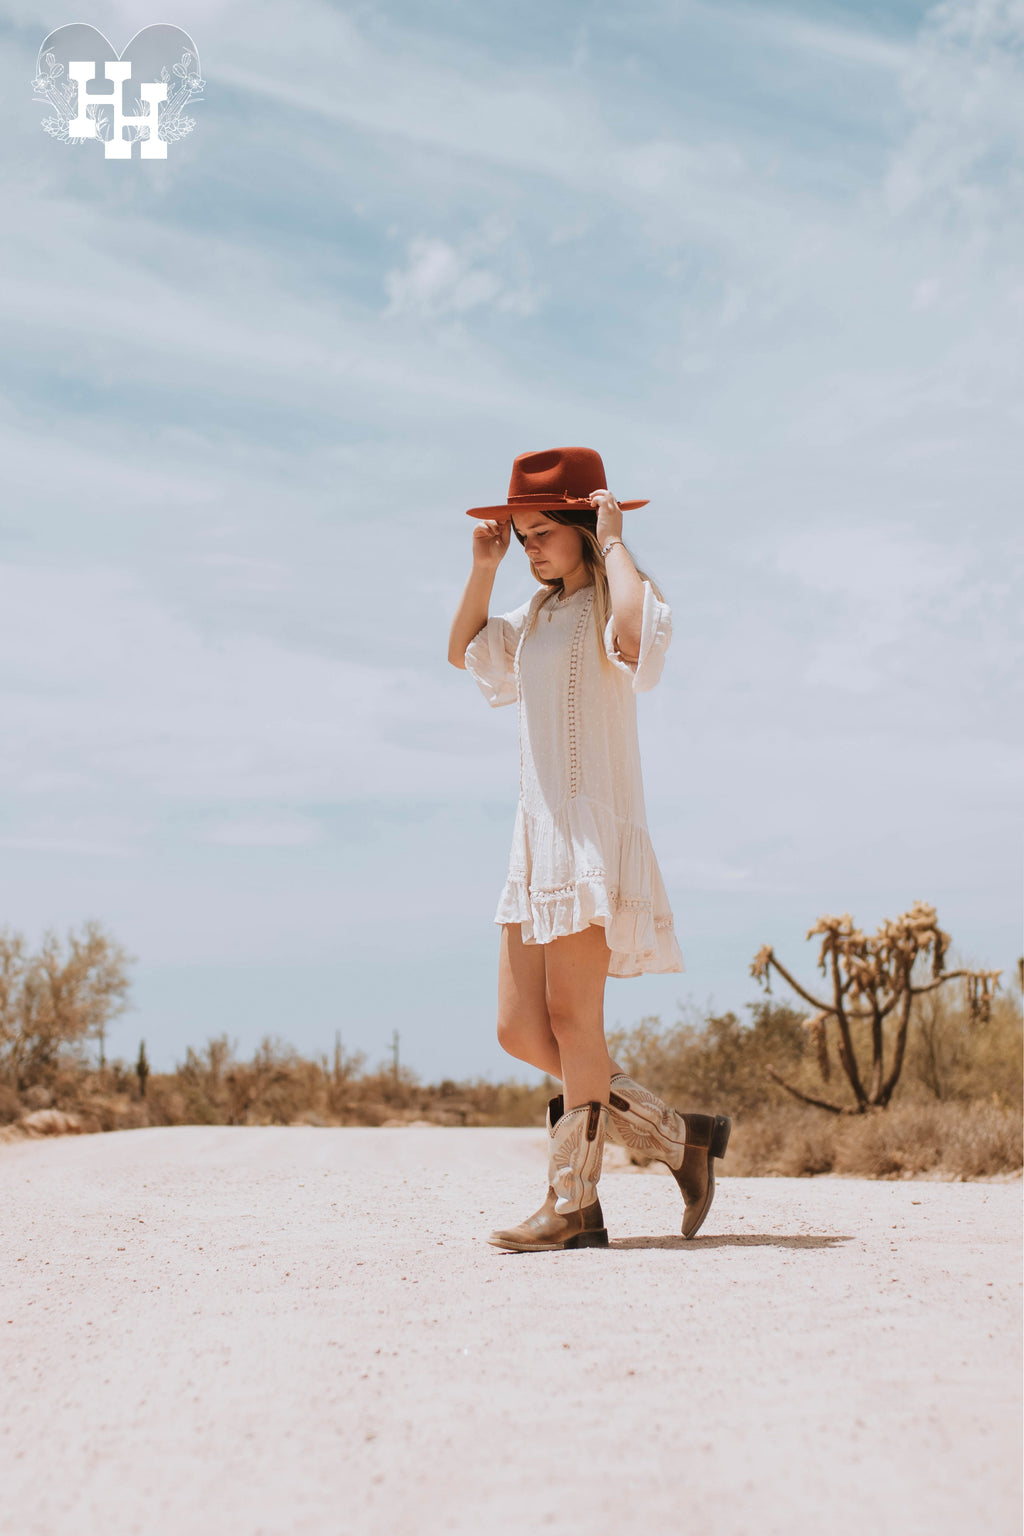 Side view of girl wearting a cream color dress the hits around mid thigh but an inch longer in the back. Dress has a drop waist with 3/4 lenght belled sleeves. Dress is worn with boots and wide brim hat.